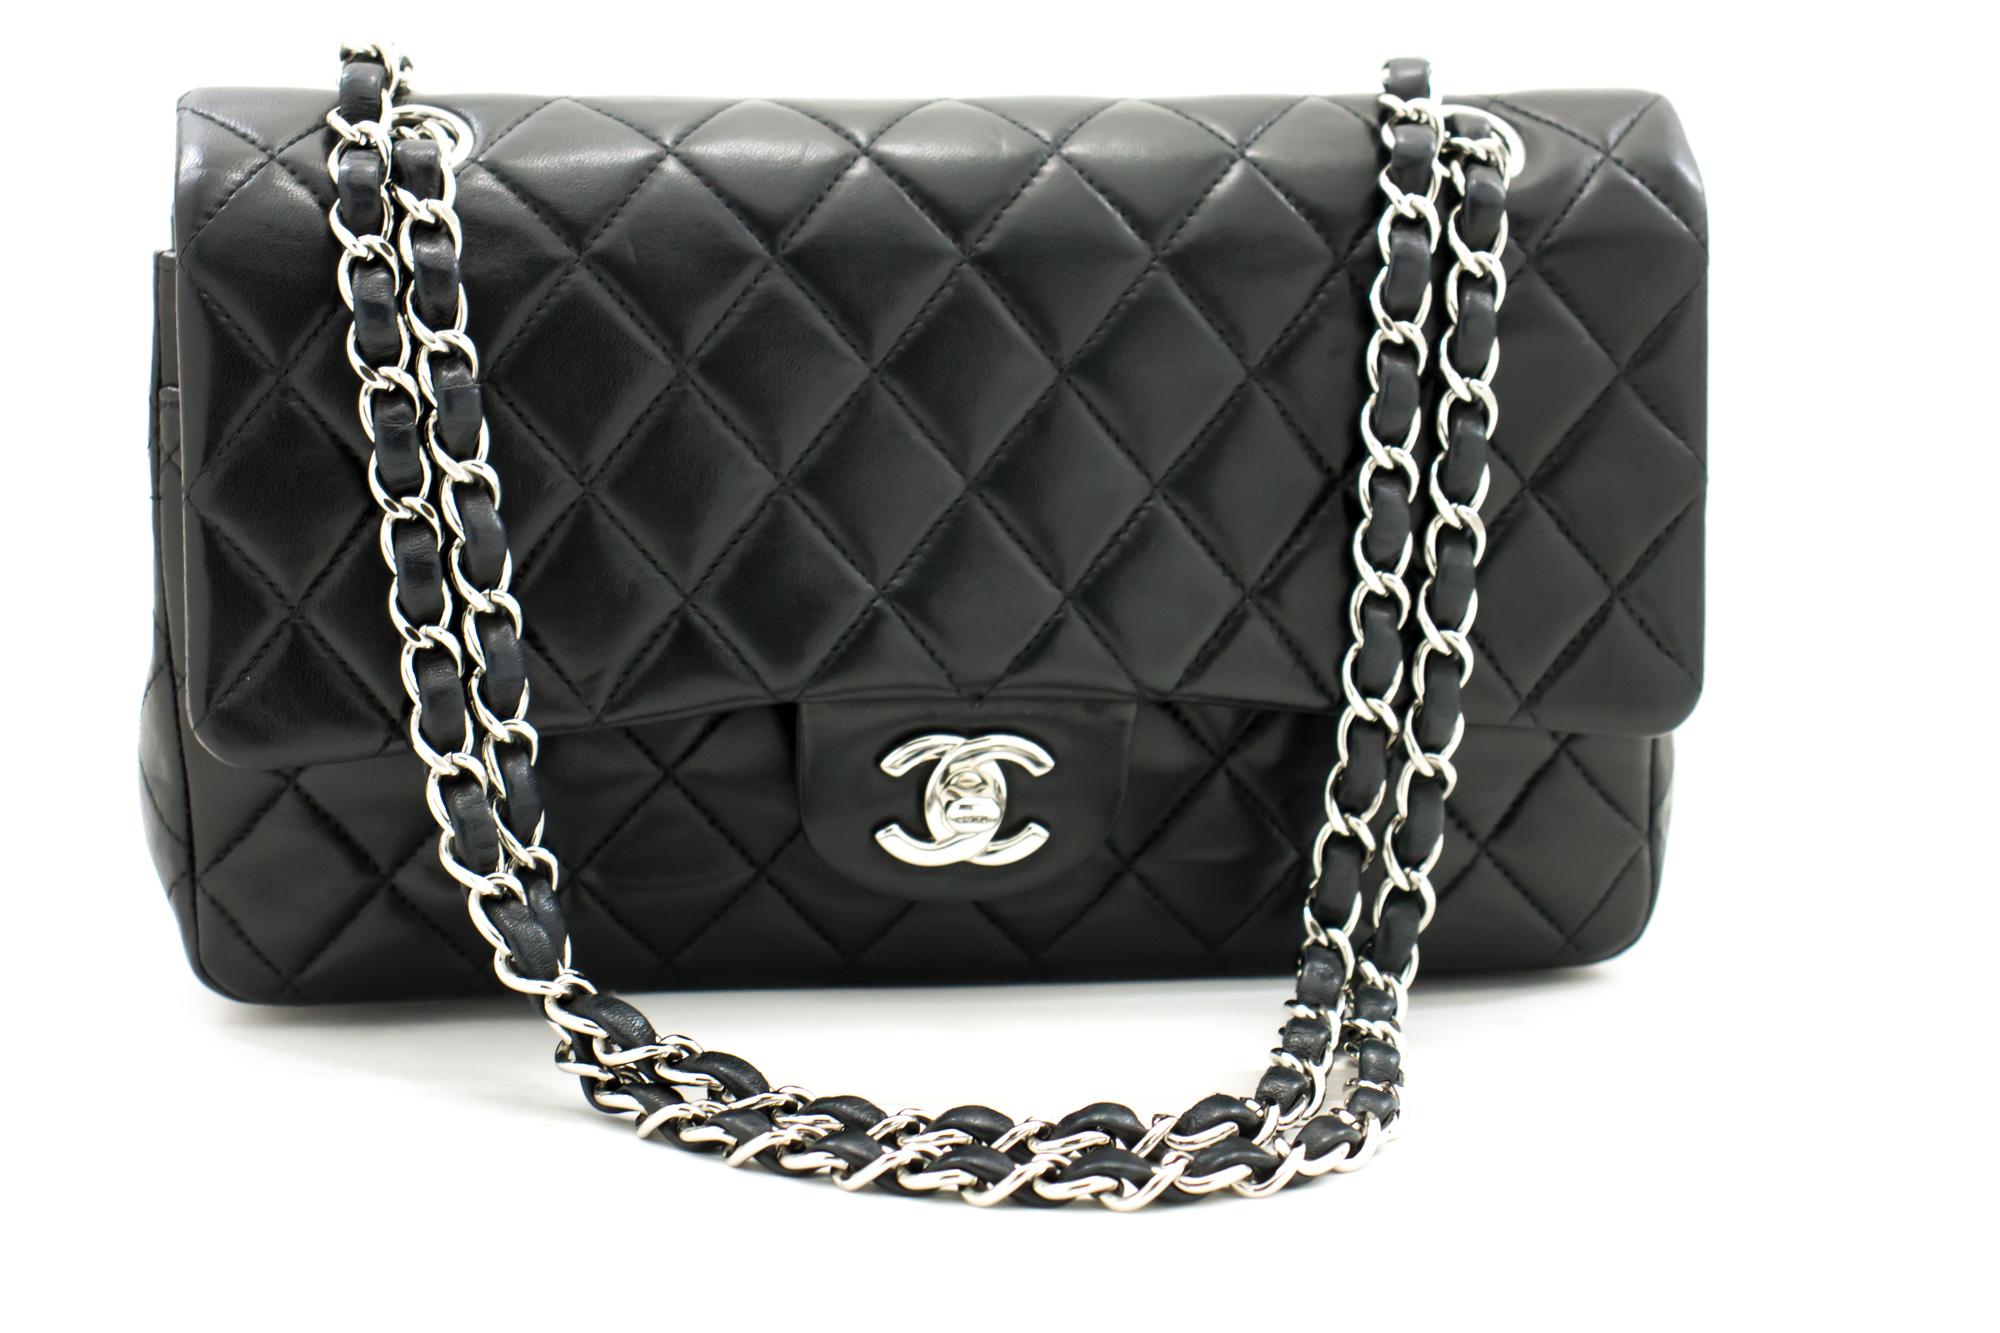 An authentic CHANEL 2.55 Classic Double Flap Medium Silver Chain Shoulder Bag Black. The color is Black. The outside material is Leather. The pattern is Solid. This item is Contemporary. The year of manufacture would be 2003.
Conditions &